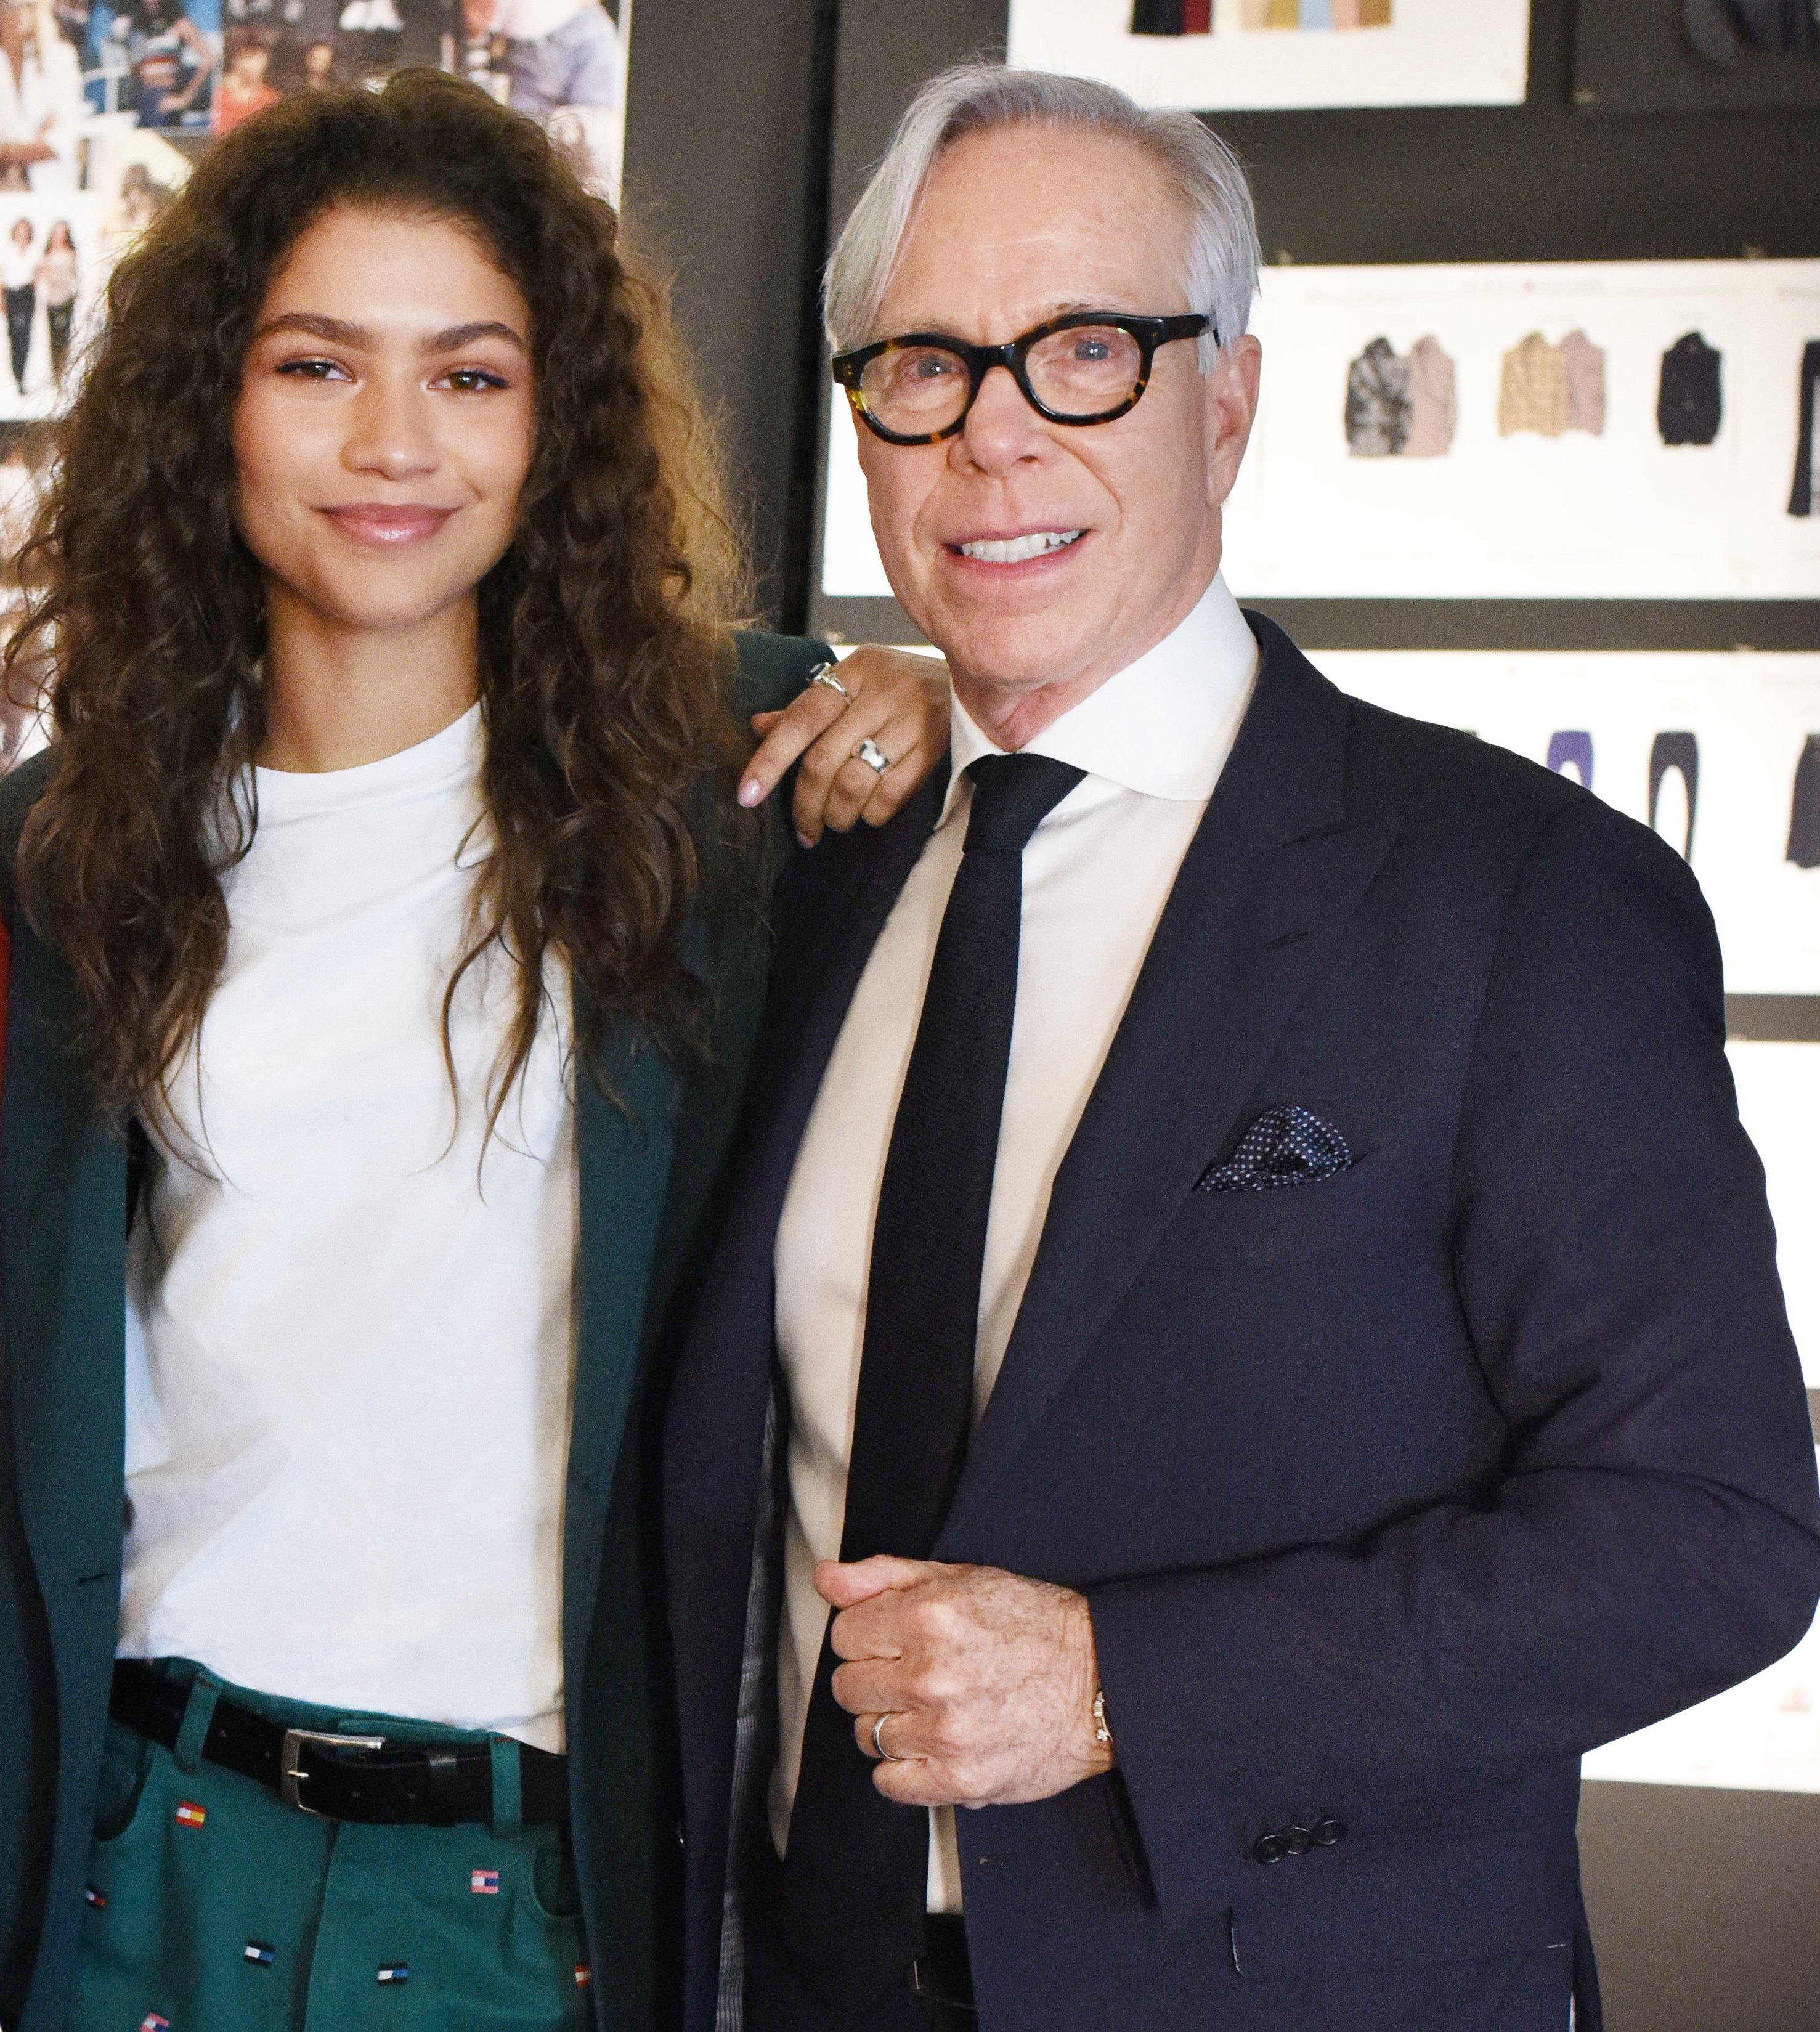 sundhed kampagne mønster Tommy Hilfiger Announces Zendaya as the New Global Women's Ambassador and  Co-Designer for the TommyXZendaya Collaborative Collection | Business Wire